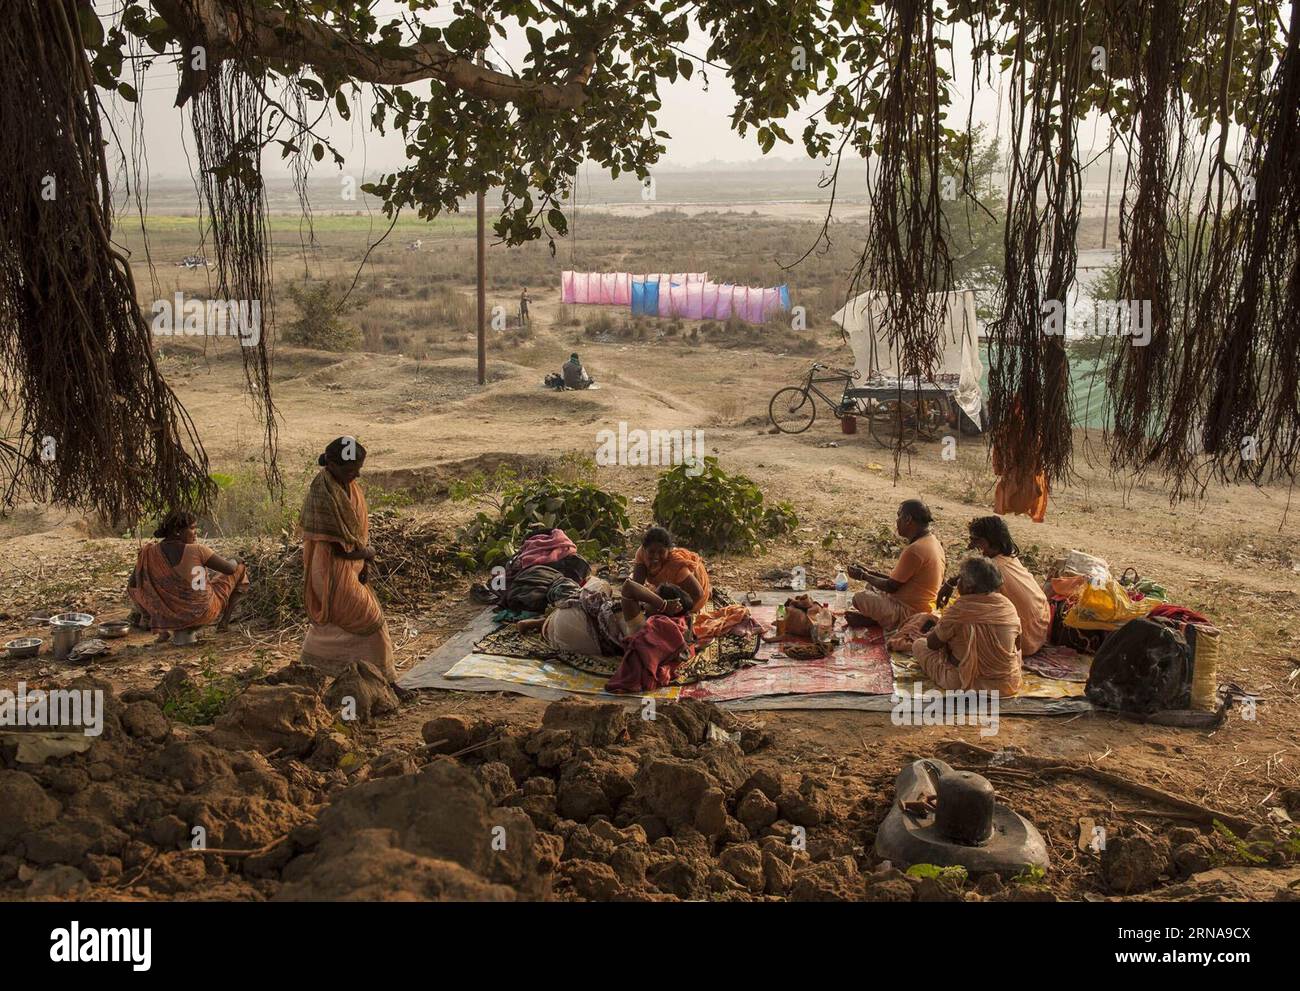 BOLPUR,  -- Indian Hindu devotees take shelter under a tree at the Joydev Fair beside the Ajay river, some 200 kilometers away from Kolkata, capital of eastern Indian state West Bengal, Jan. 14, 2016. A large number of Hindu pilgrims converging for the Joydev Fair which is culminating on the occasion of Makar Sankranti, a holy day of the Hindu calendar, during which taking a dip is considered to be of great religious significance. ) INDIA-WEST BENGAL-JOYDEV FAIR TumpaxMondal PUBLICATIONxNOTxINxCHN   Bolpur Indian Hindu devotees Take Shelter Under a Tree AT The Joydev Fair Beside The Ajay River Stock Photo